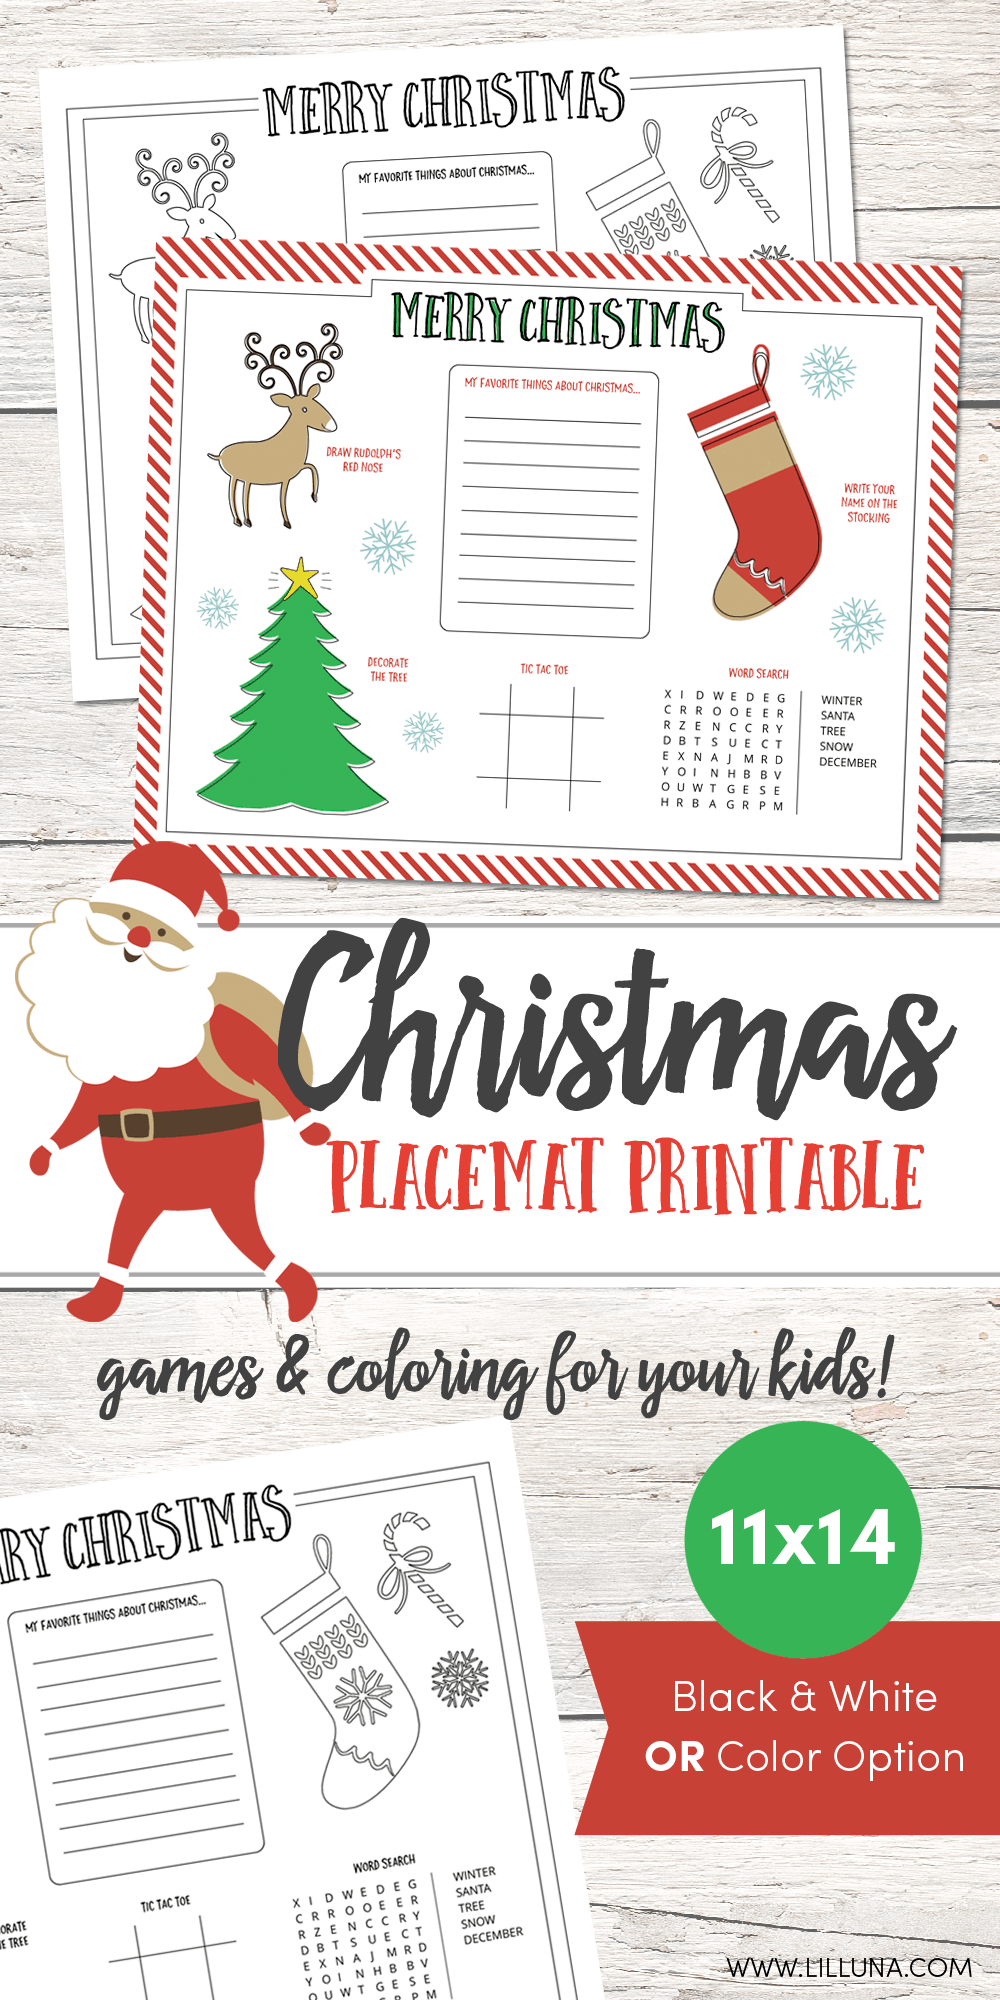 FREE Christmas Placemat Printable - perfect for upcoming Christmas activities and get togethers. The kids will love these!!